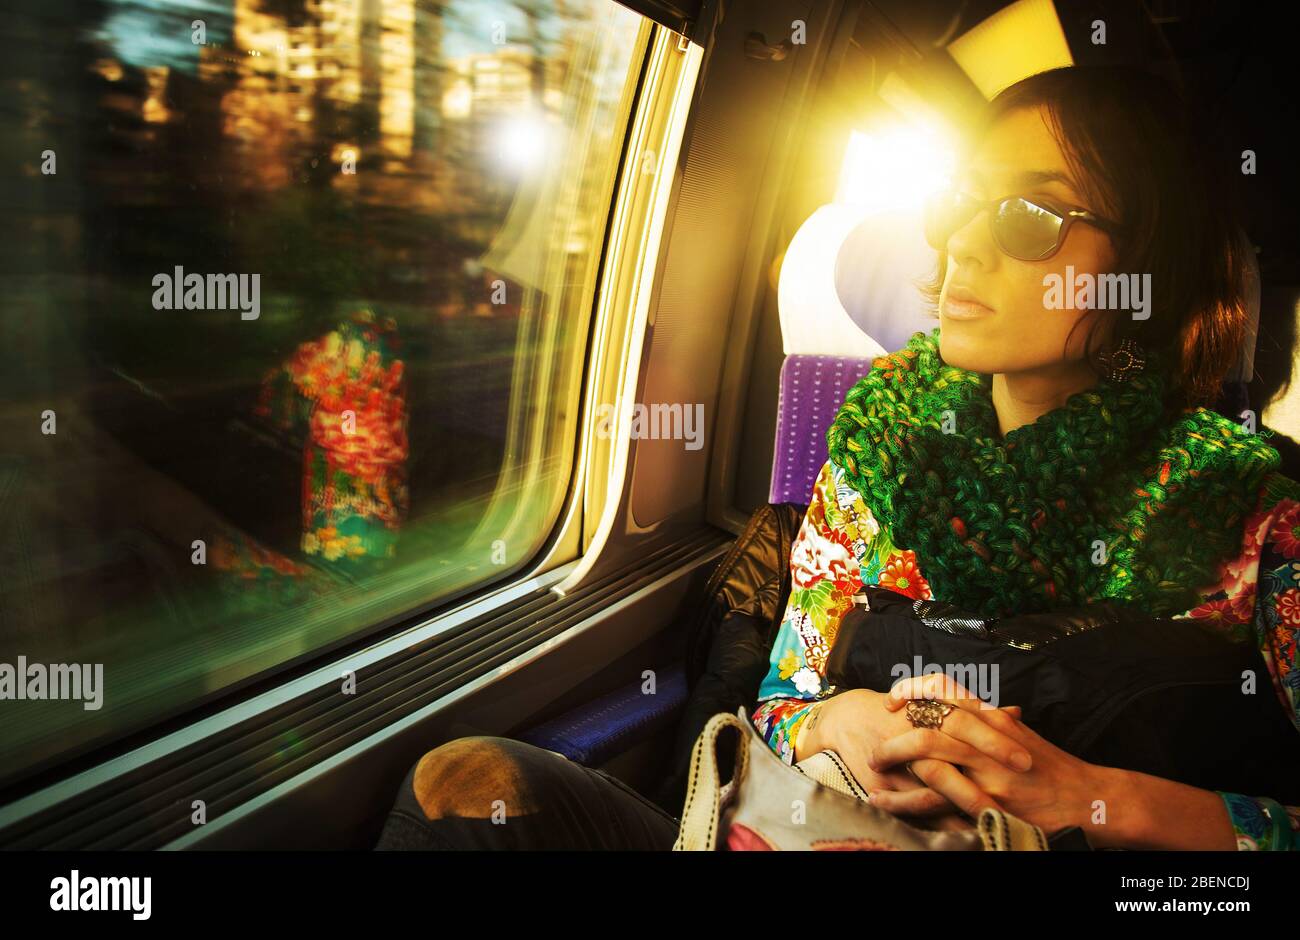 Candid shot of a young beautiful Parisian woman traveling in a train, sitting near the window Stock Photo